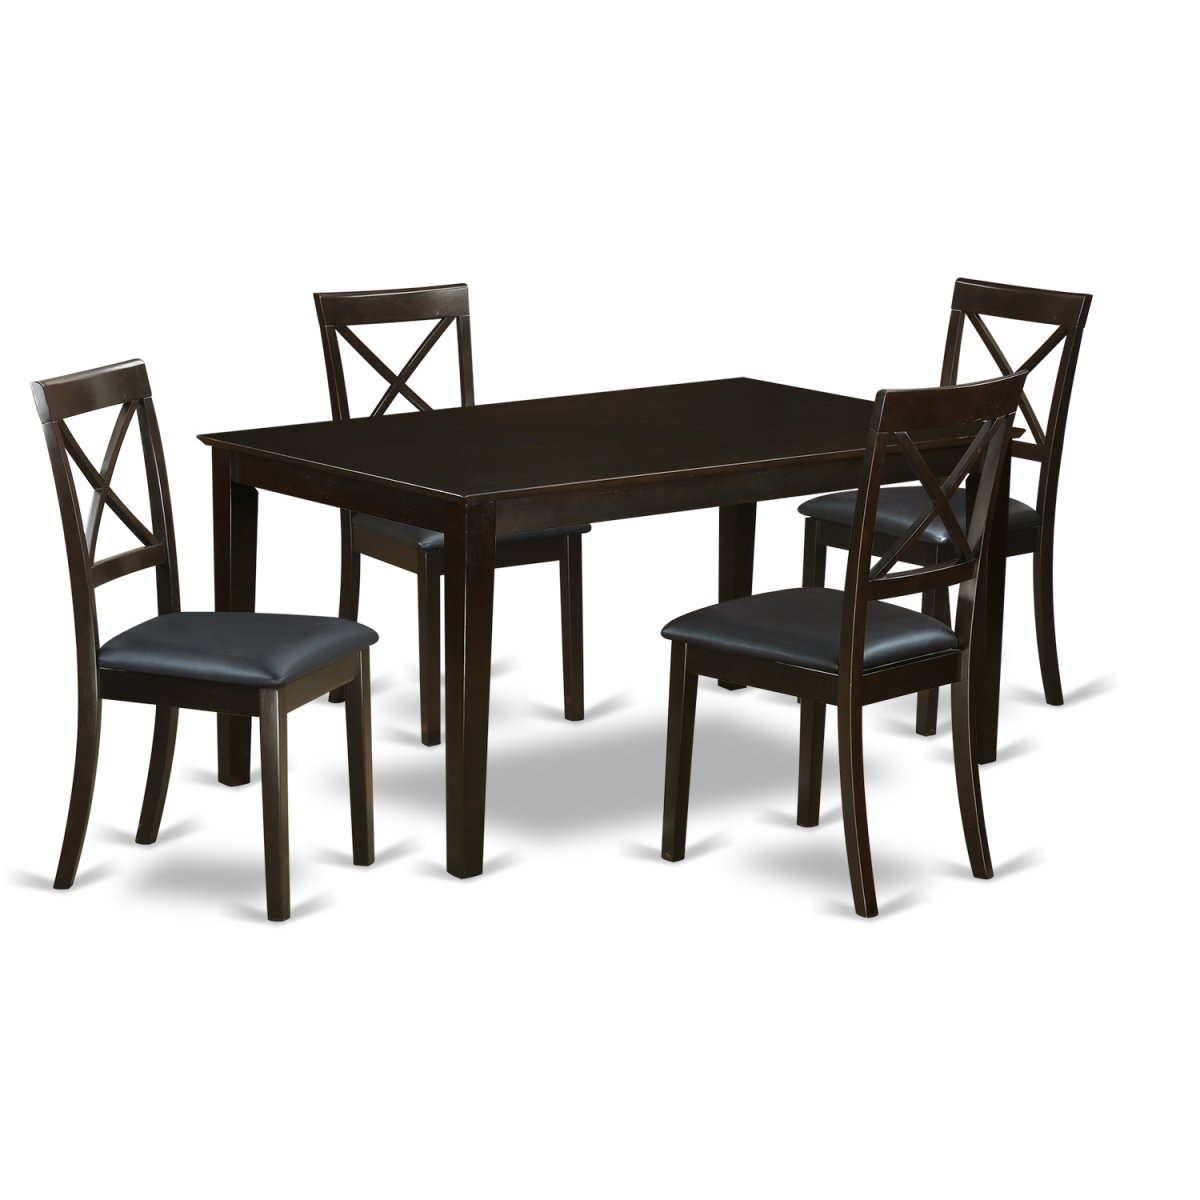 Picture of East West Furniture CABO5S-CAP-LC Dining Table Set - Solid Top Dining Room Table & 4 Faux Leather Chairs - 5 Piece